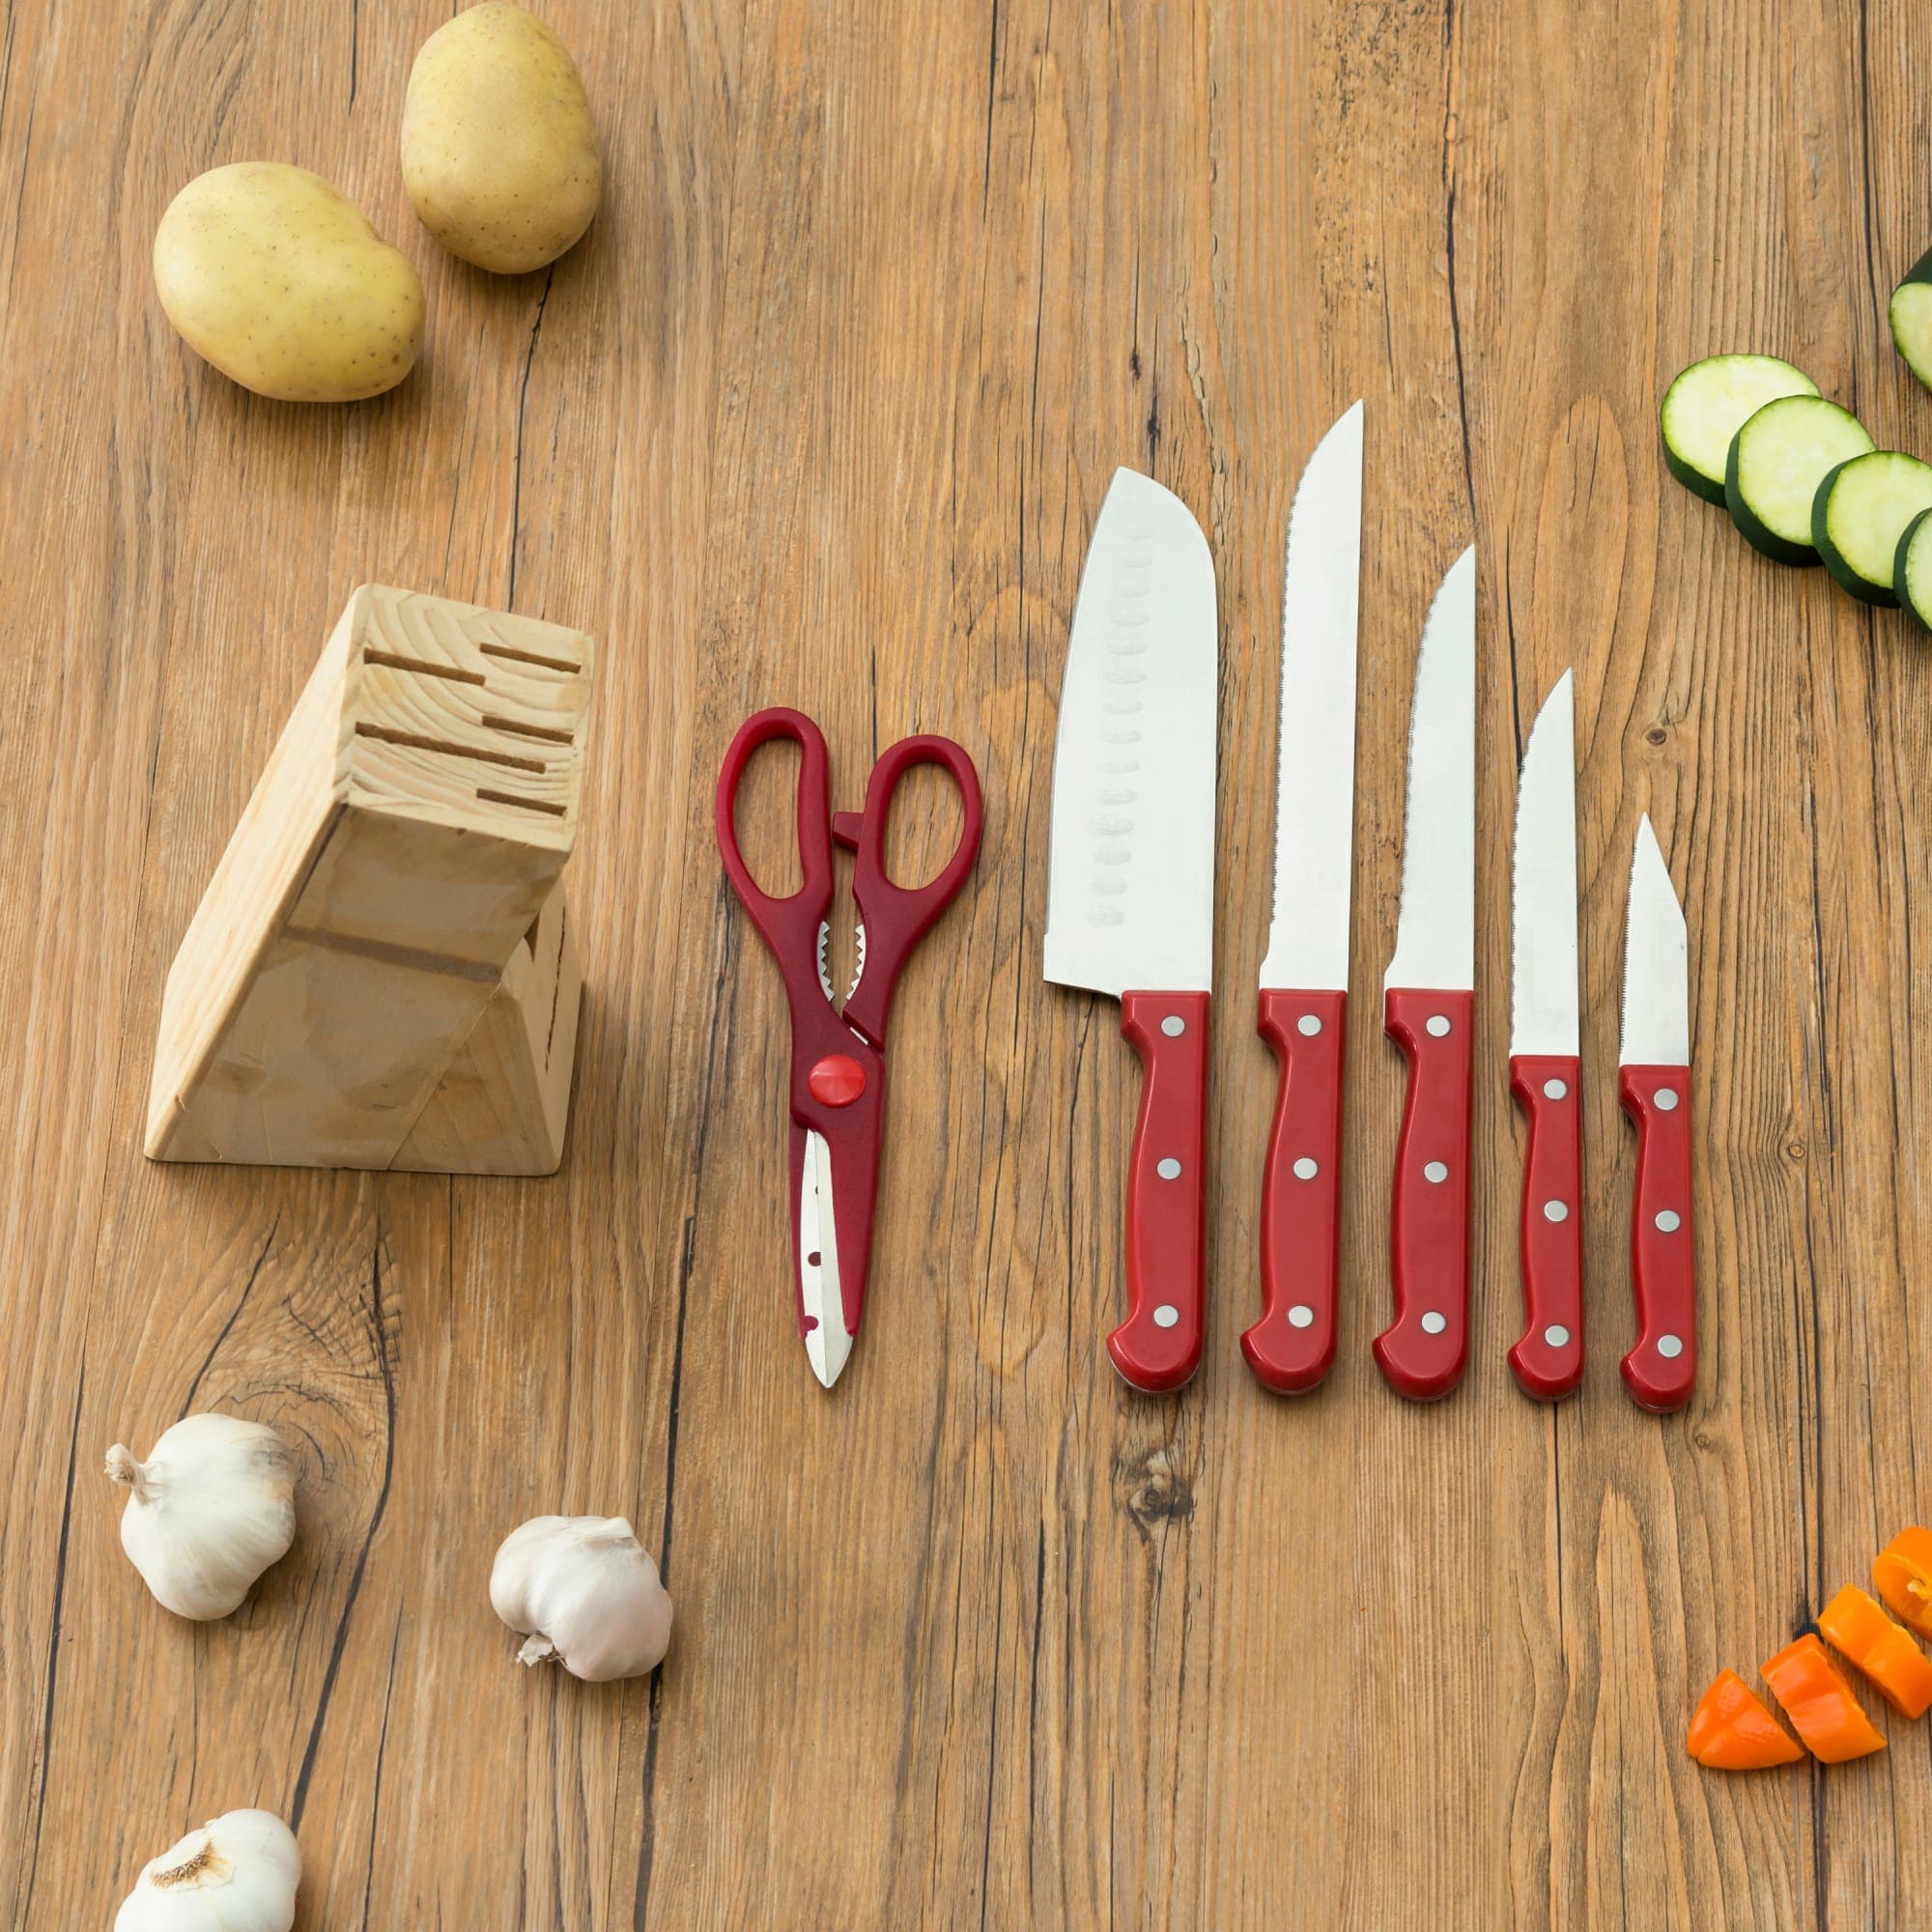 Home Basics 7 Piece Knife Set with Wood Block, Red, FOOD PREP